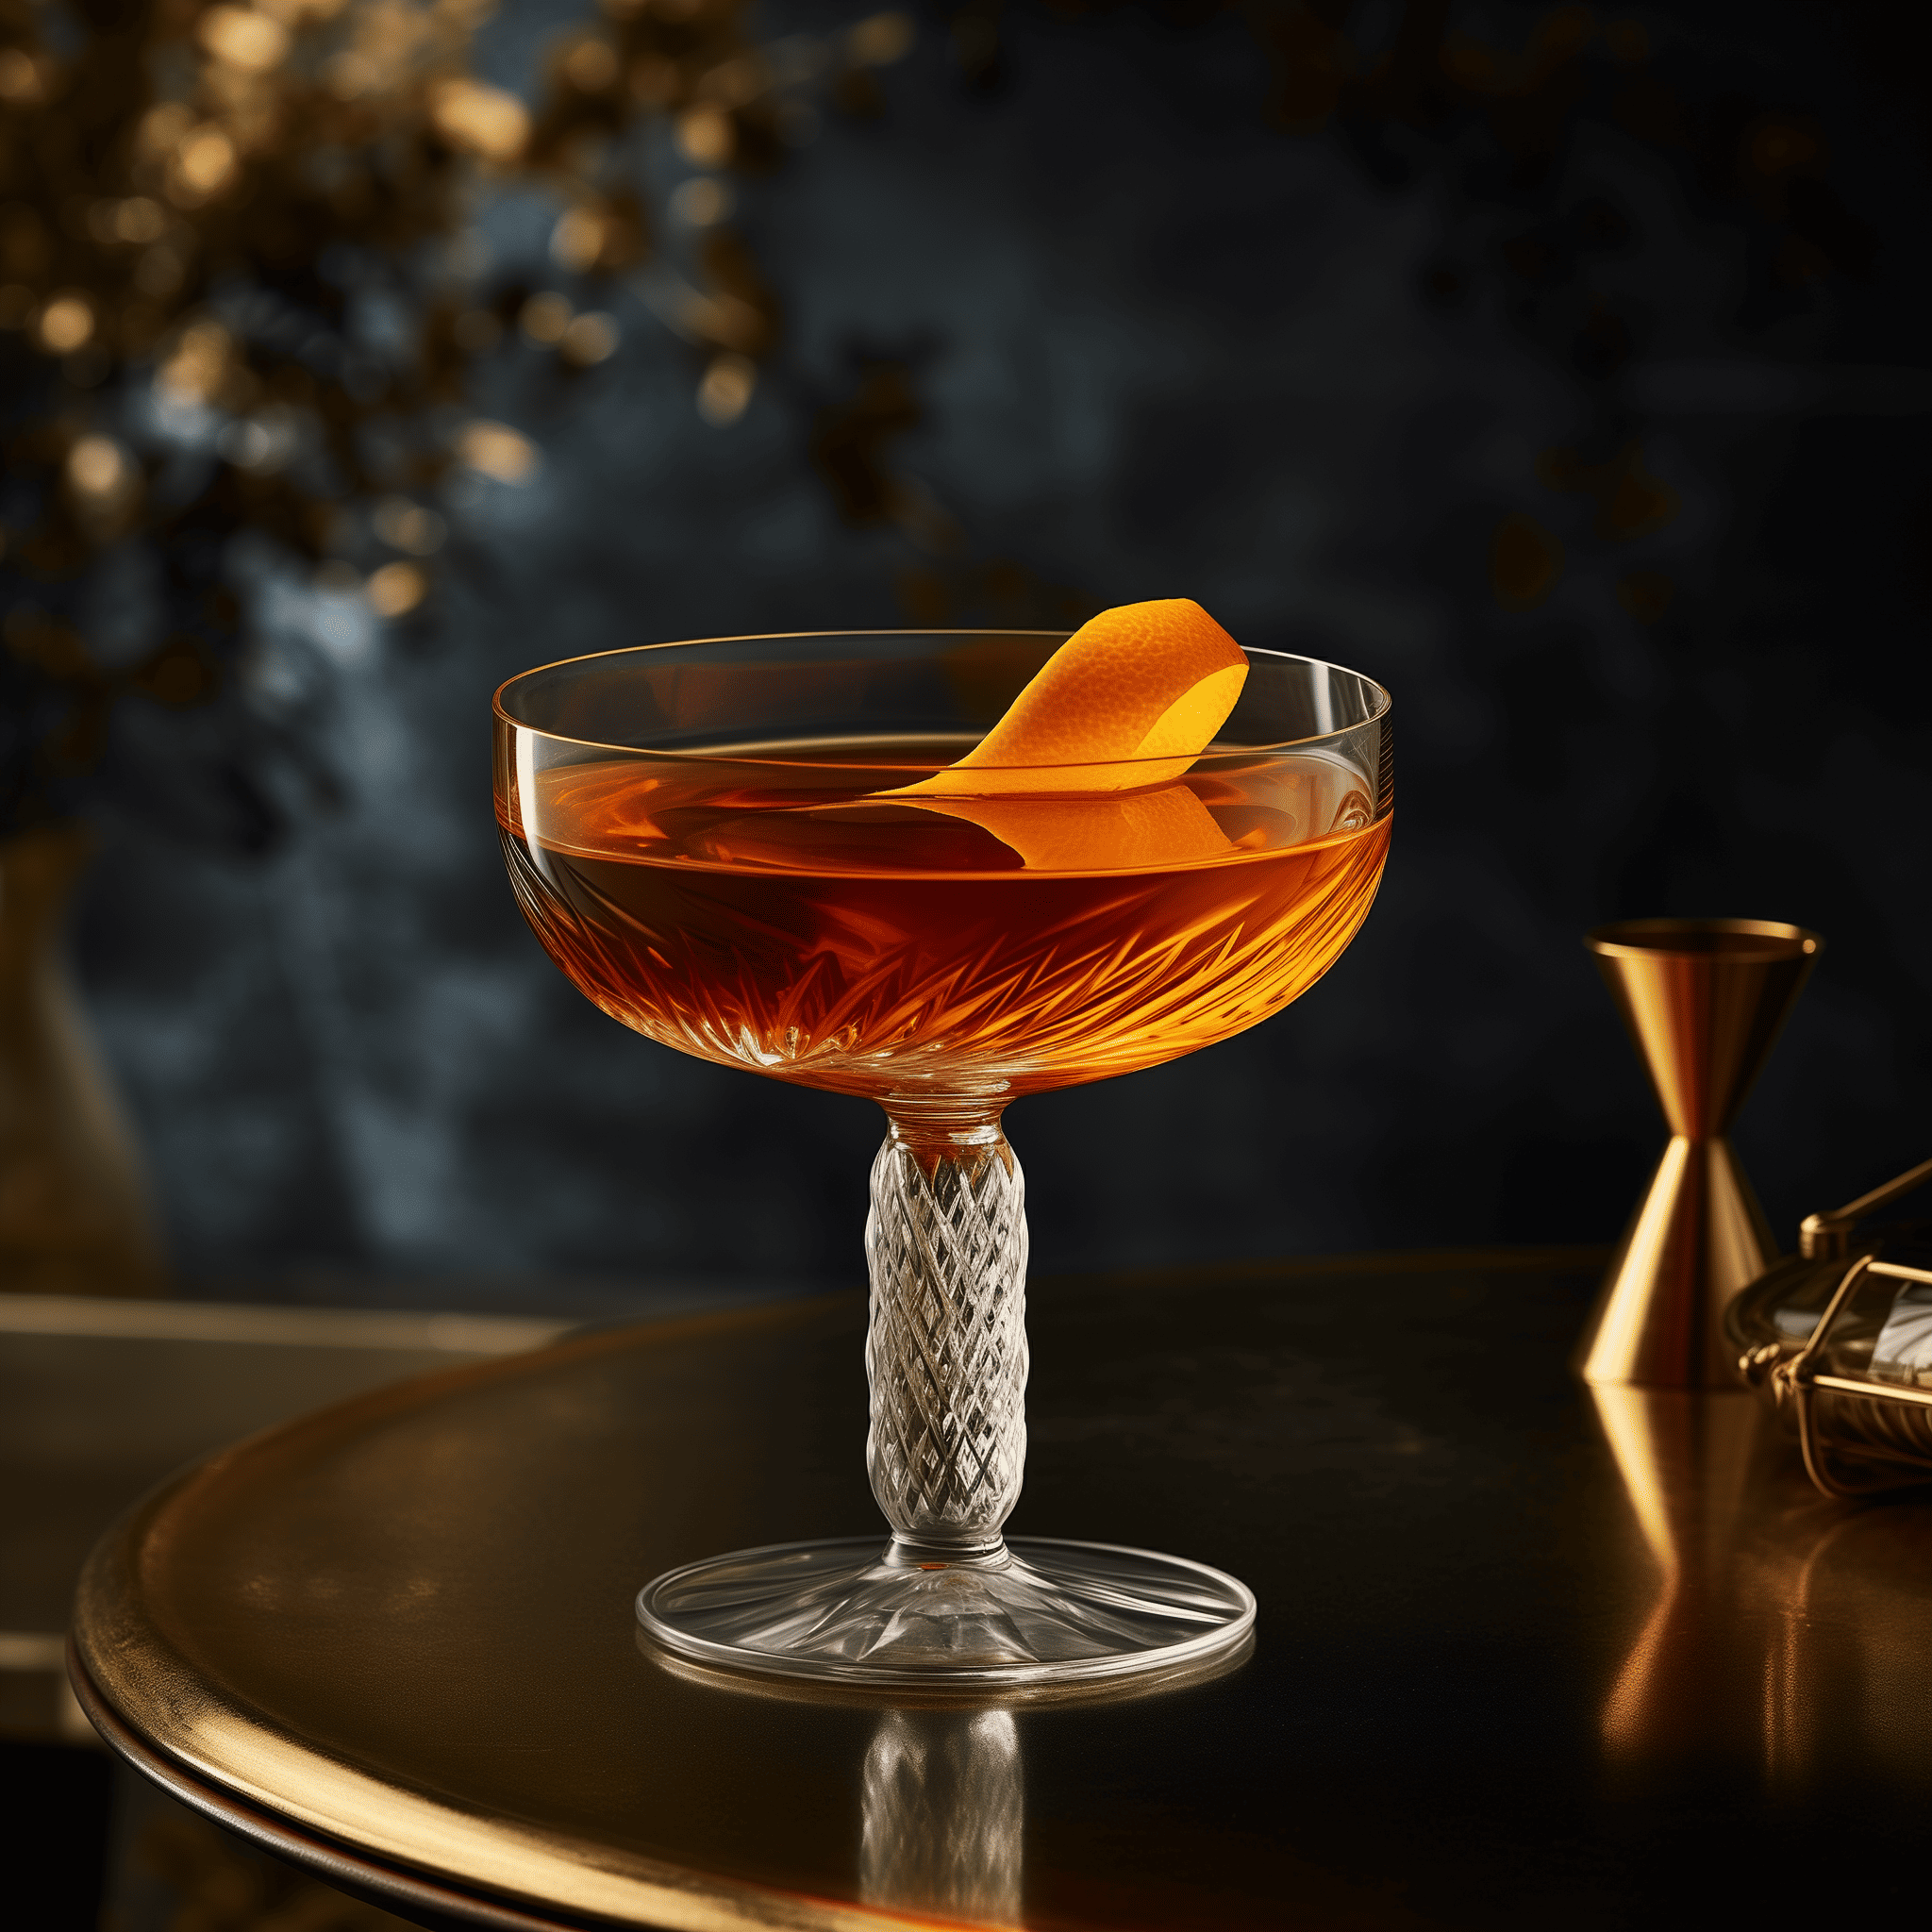 Midnight Dash Cocktail Recipe - The Midnight Dash has a robust and complex taste. It's a harmonious blend of sweet, bitter, and smoky flavors with a velvety texture. The herbal notes from the vermouth complement the smokiness of the whiskey, while the bitters add depth.